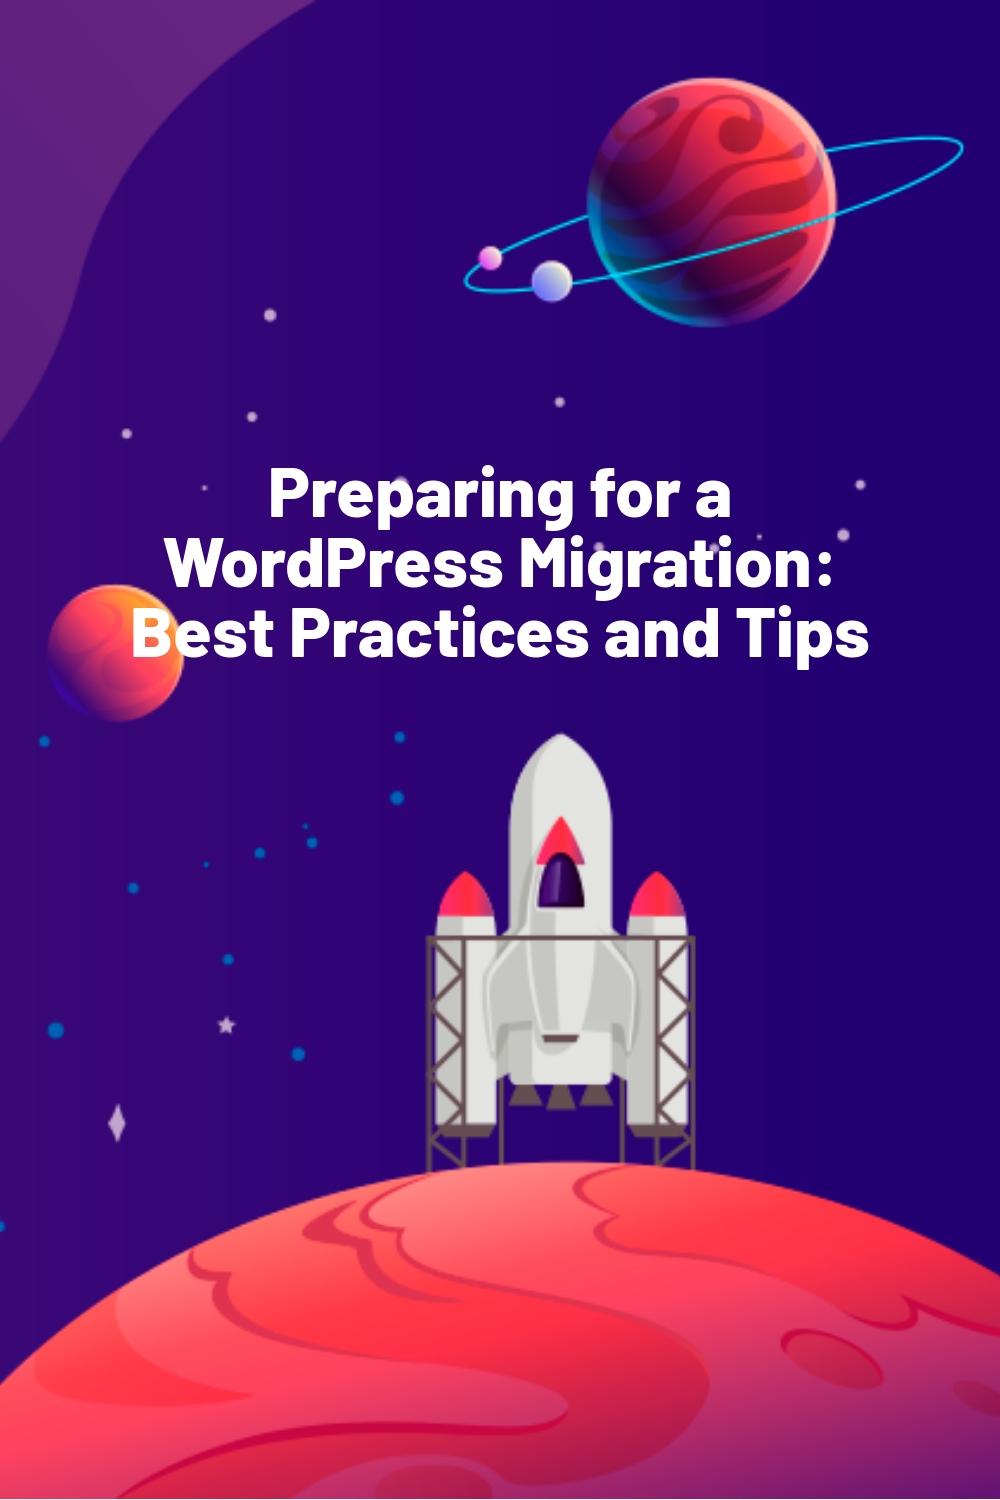 Preparing for a WordPress Migration: Best Practices and Tips